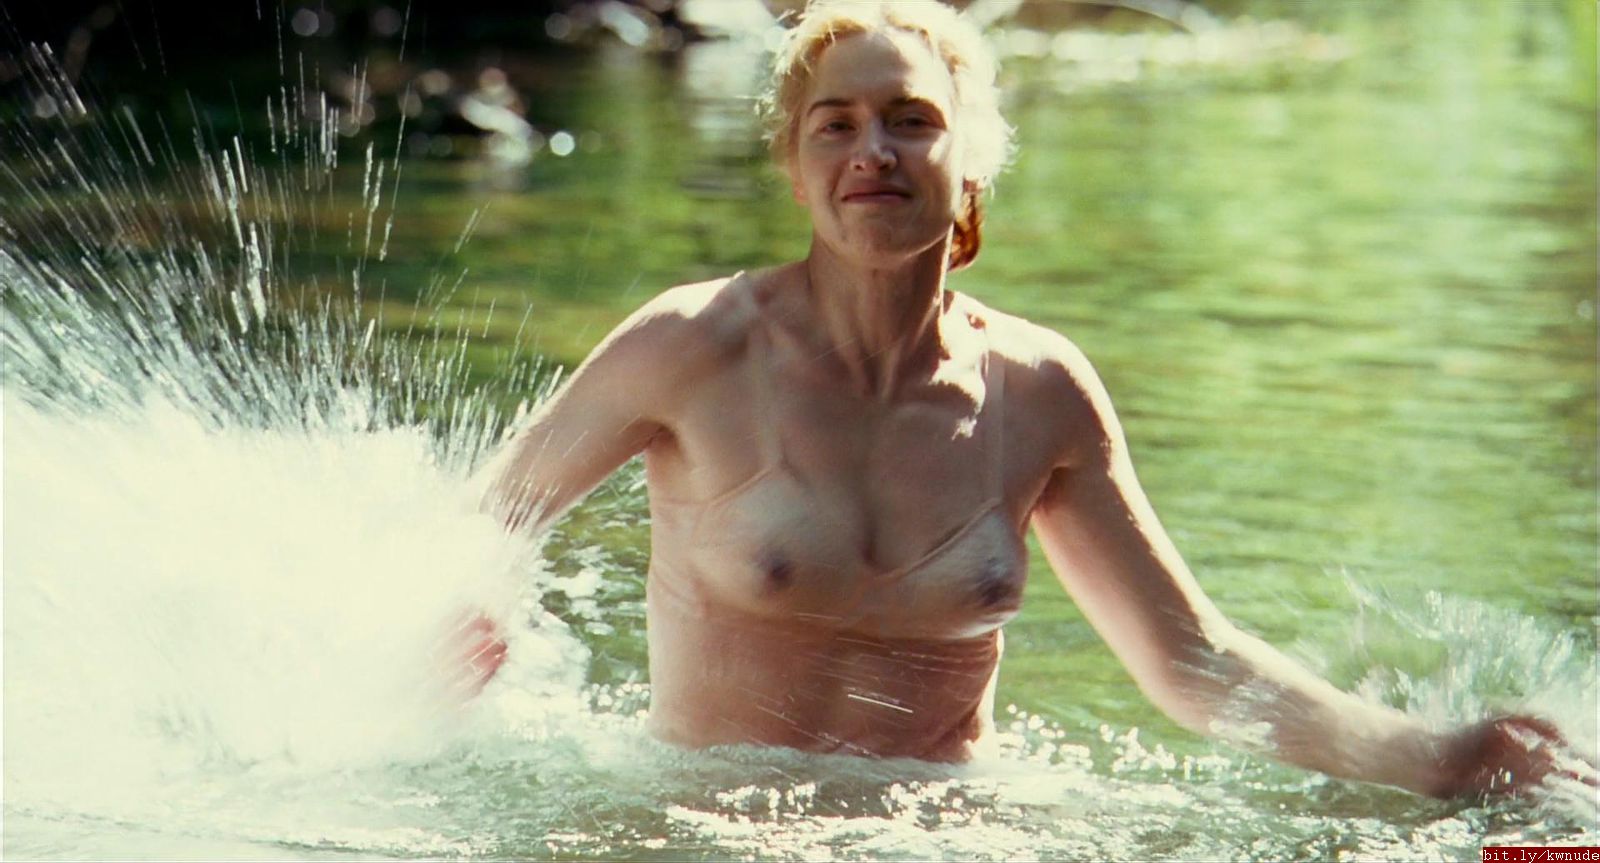 Kate Winslet Nudes from All Her Movies (100 PICS)